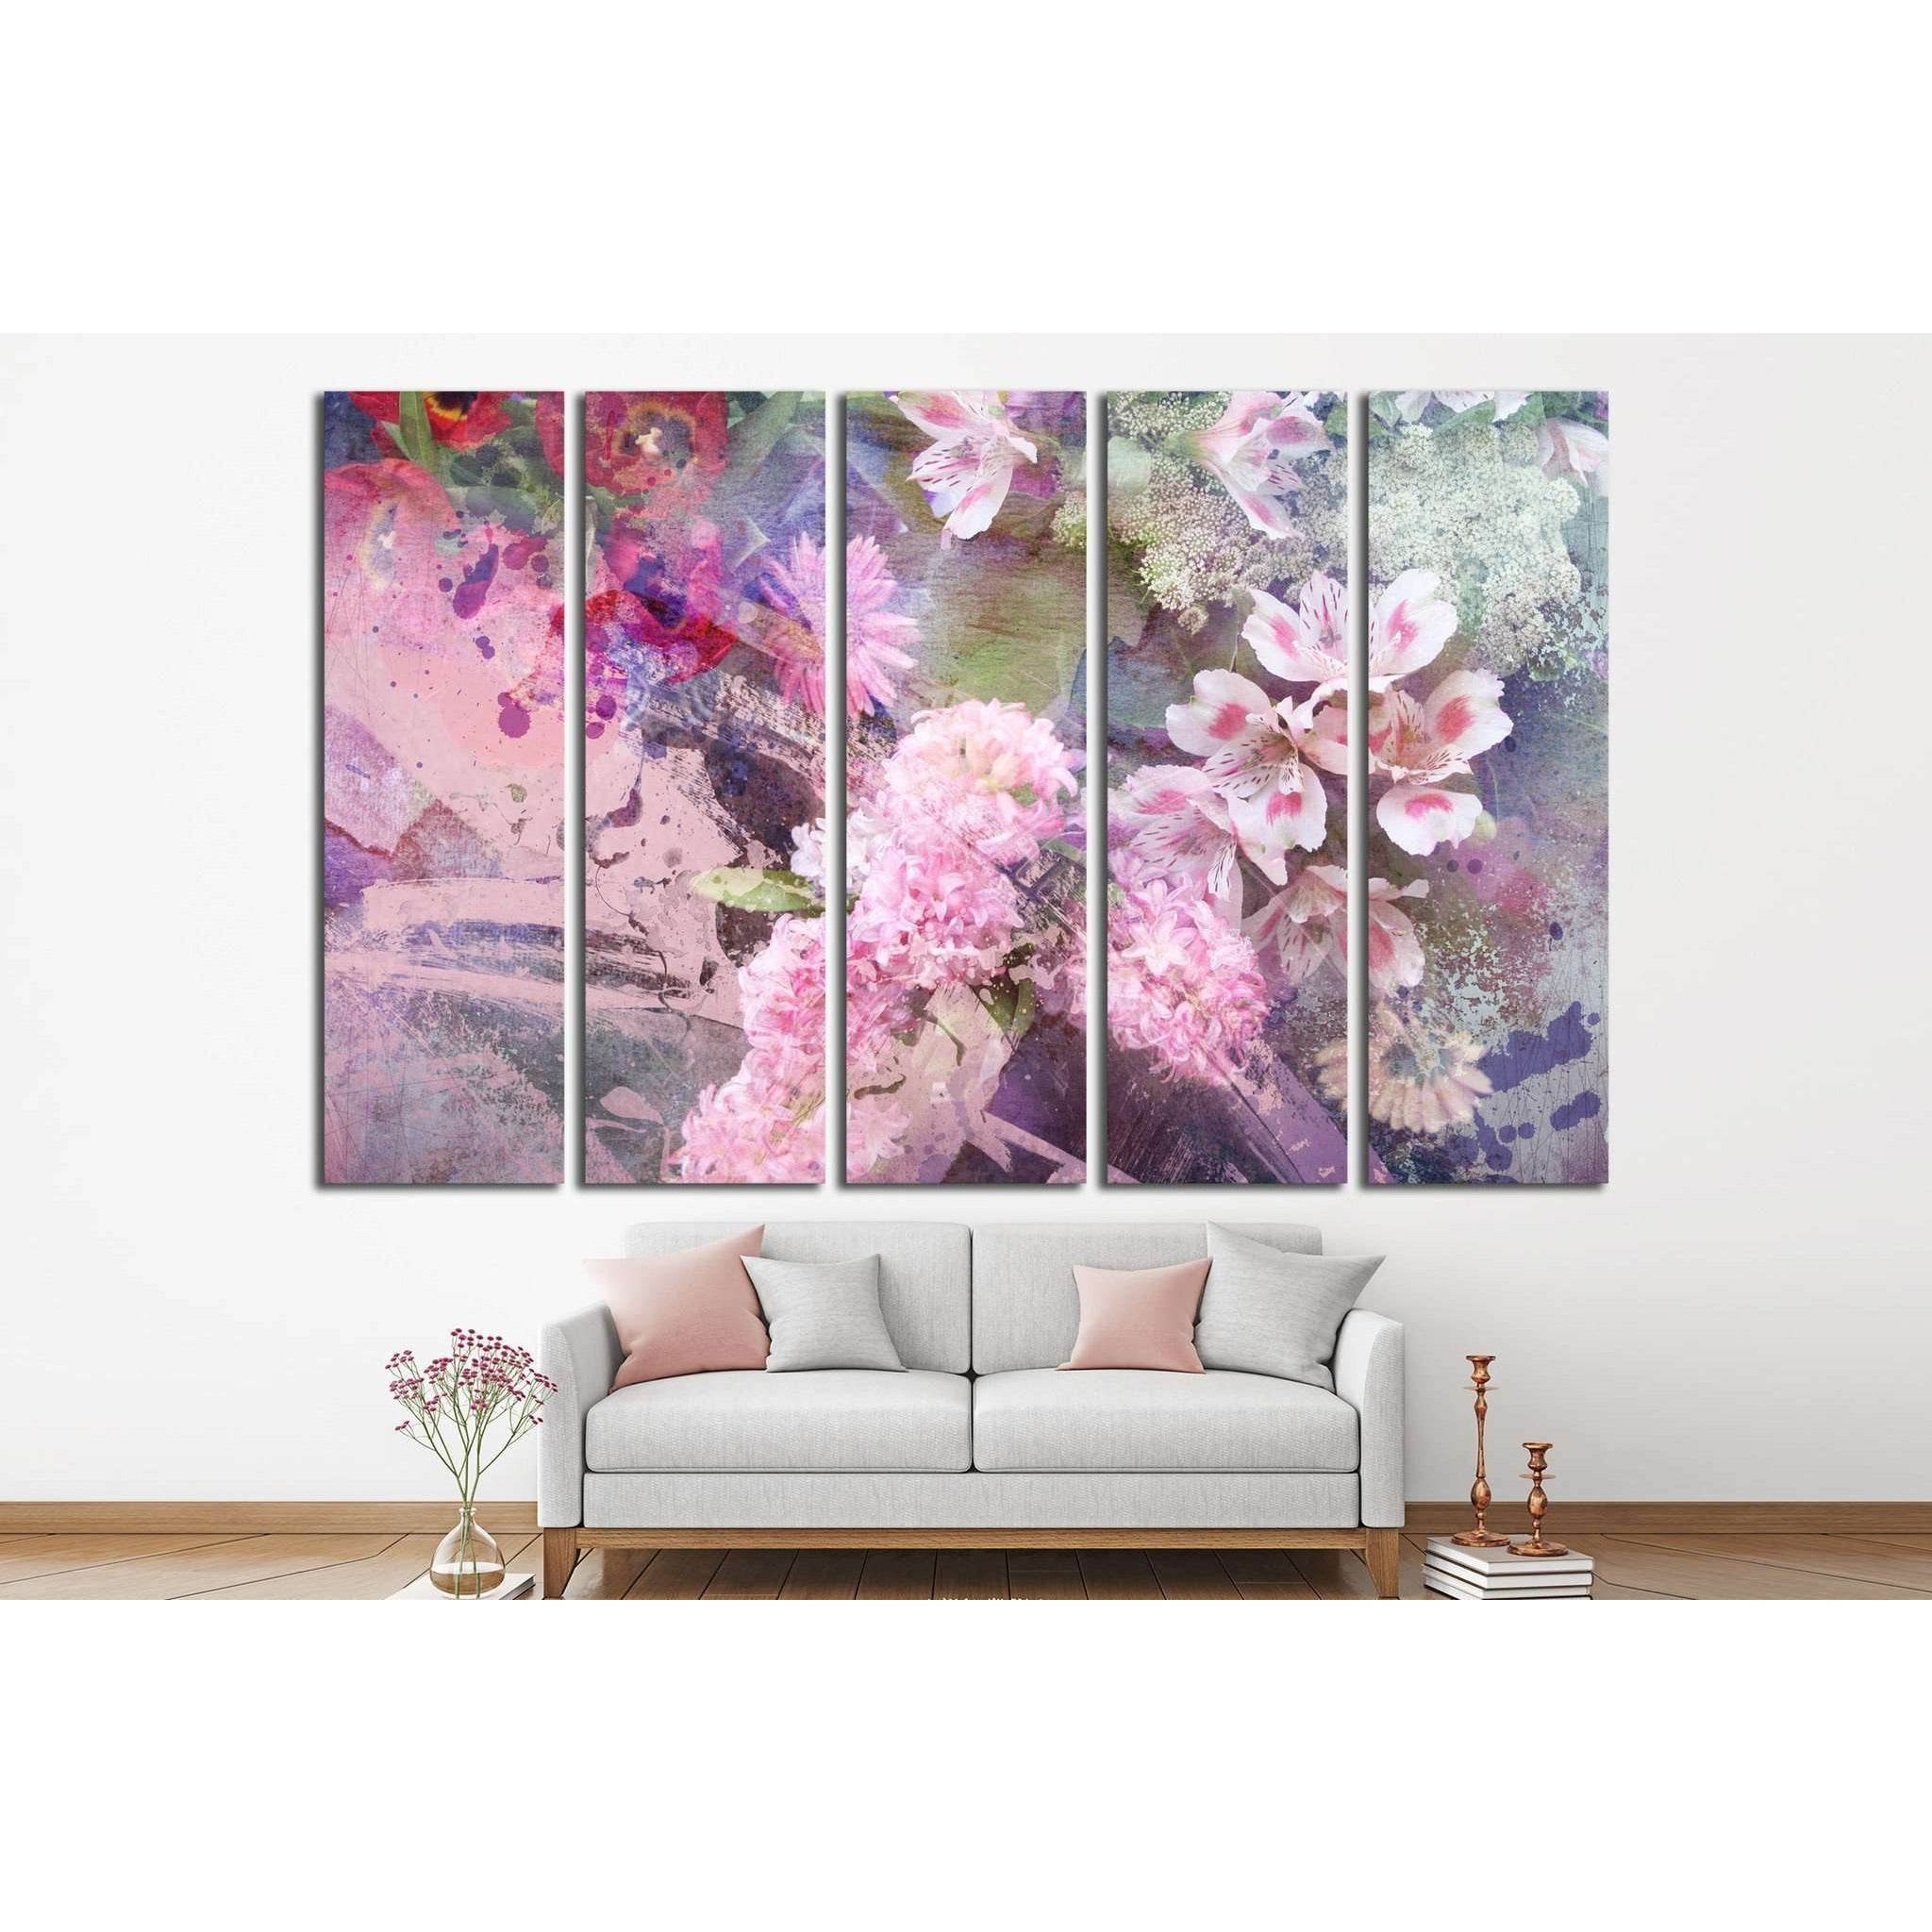 field flowers on paper texture, floral grunge №1347 Ready to Hang Canv ...